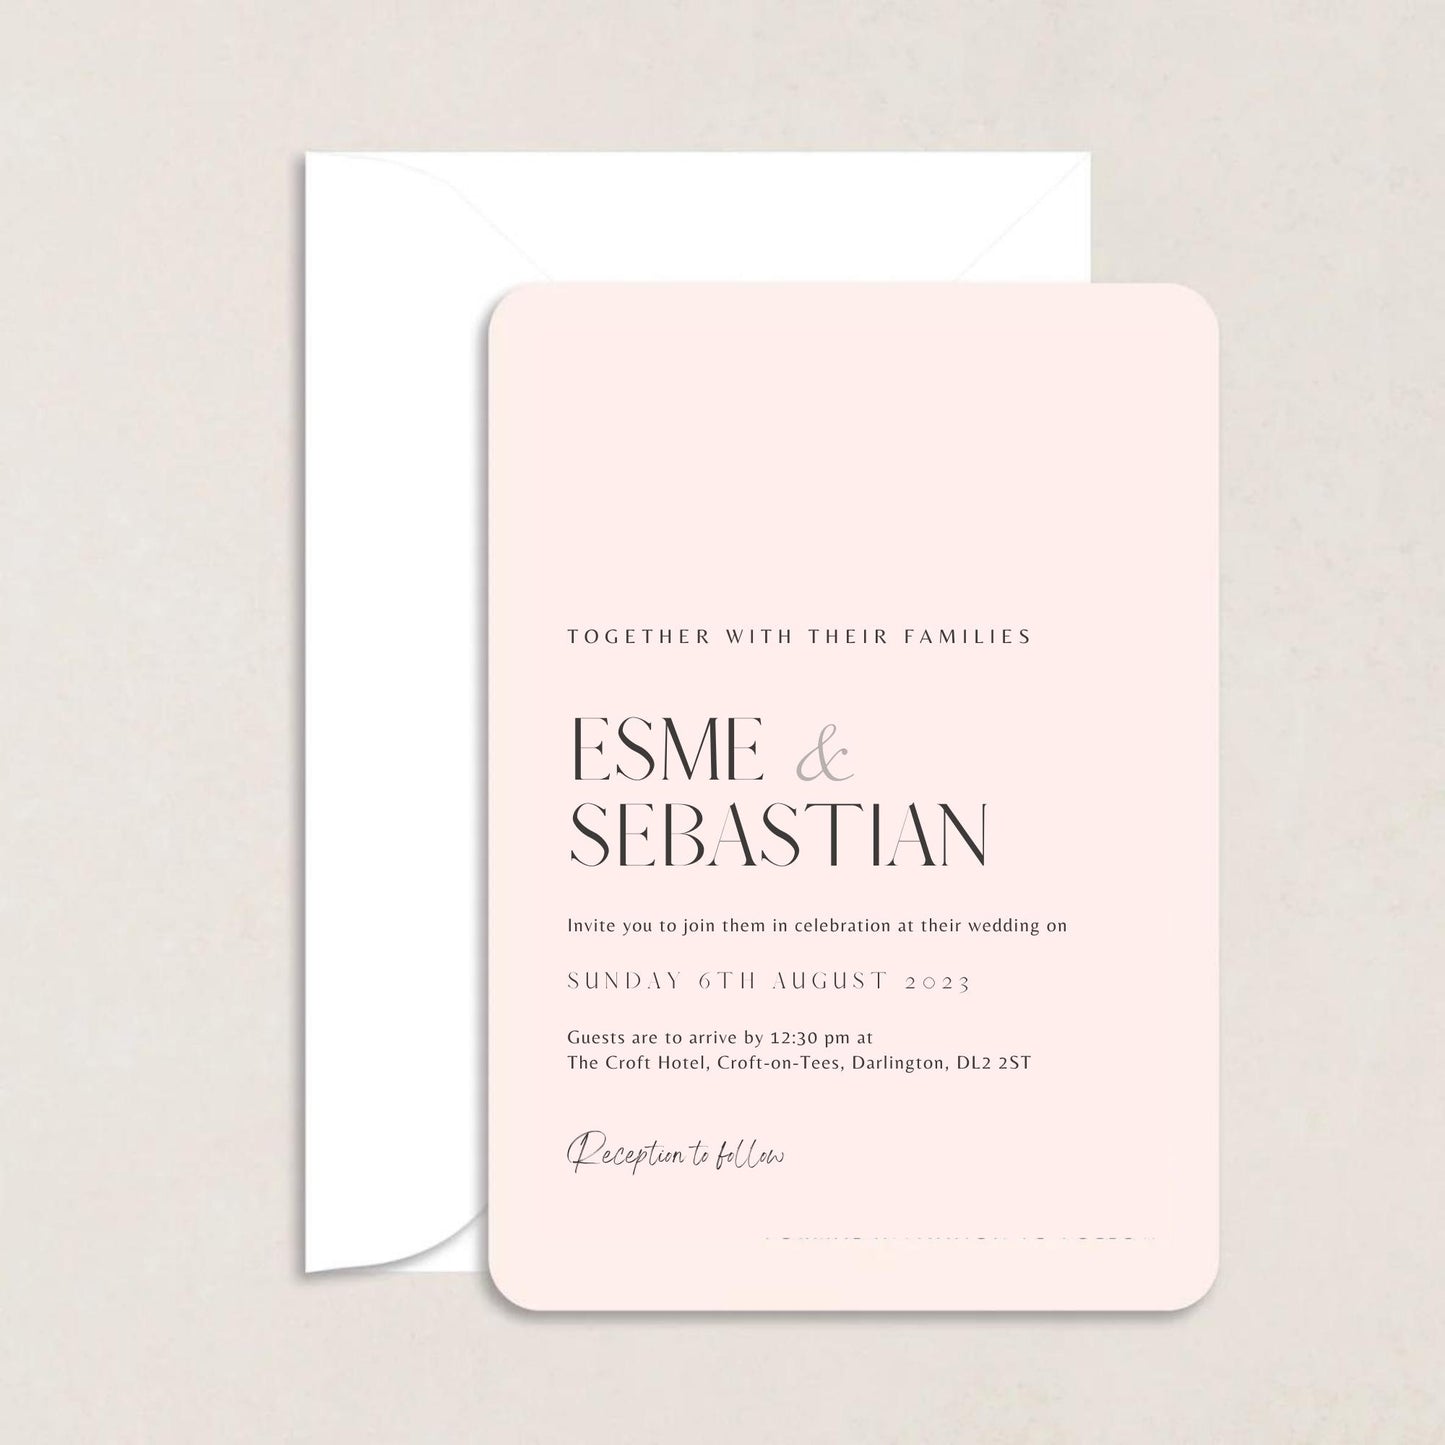 ESME Wedding Invitations - Wedding Invitations available at The Ivy Collection | Luxury Wedding Stationery